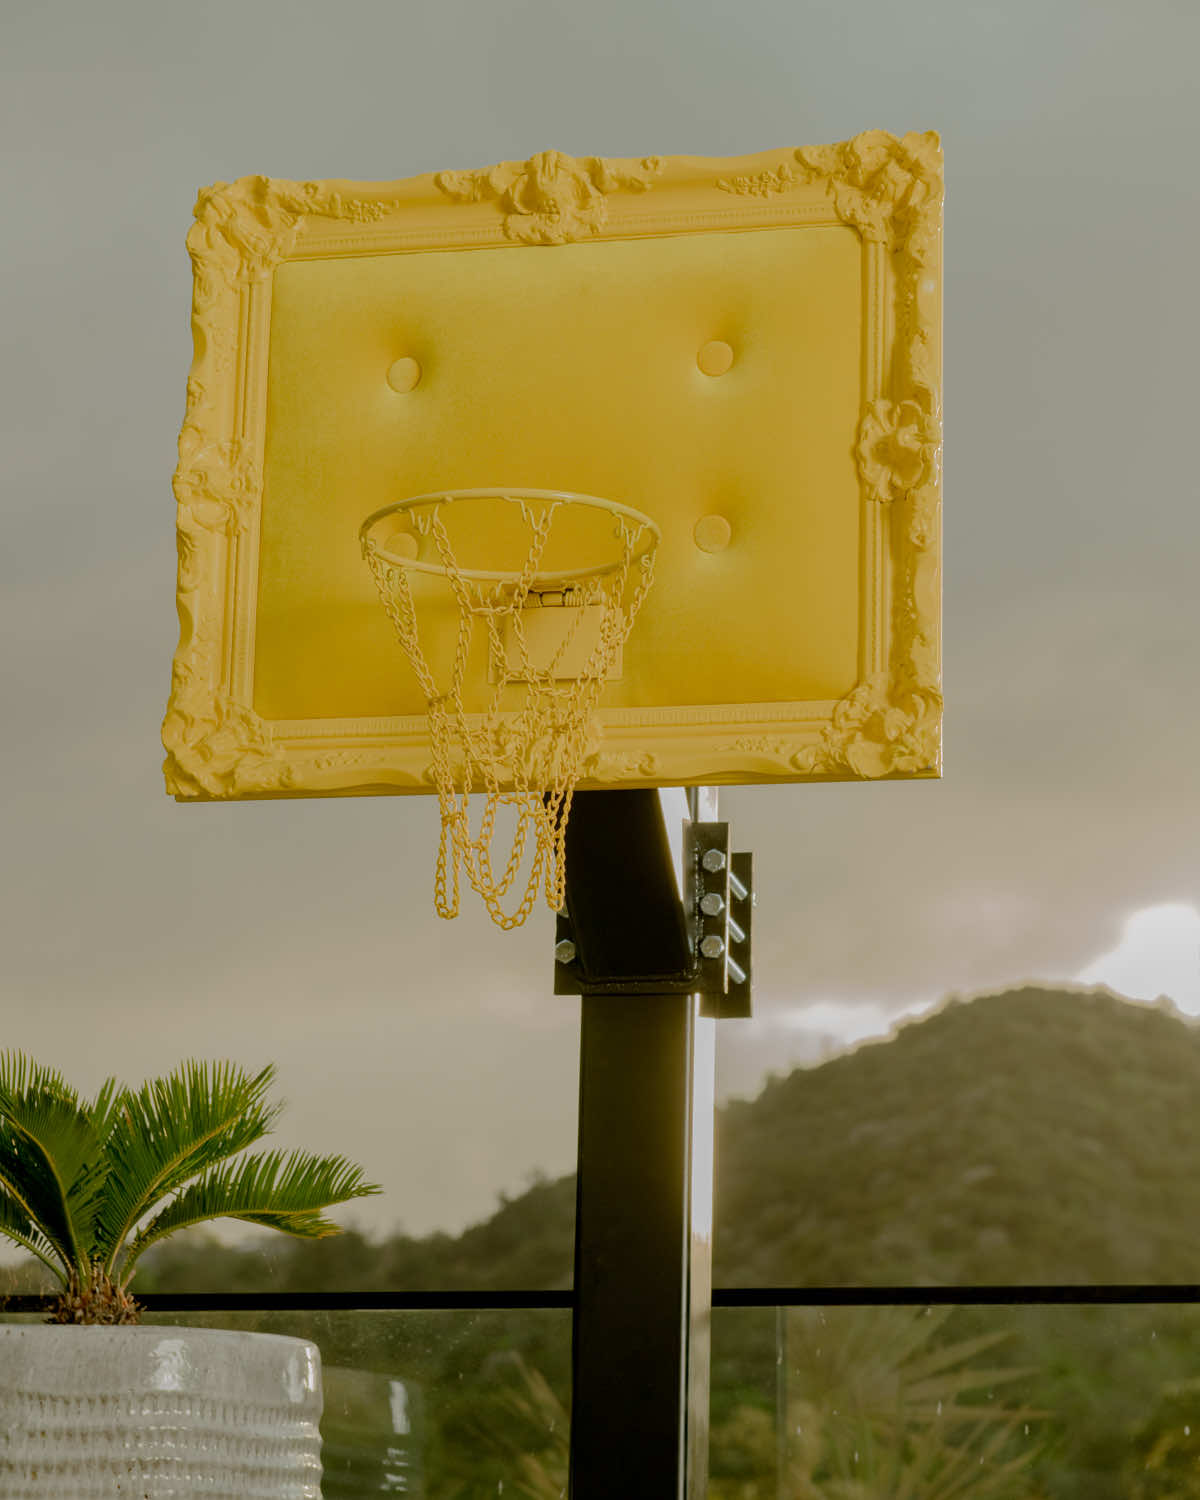 A basketball hoop with a yellow frame.